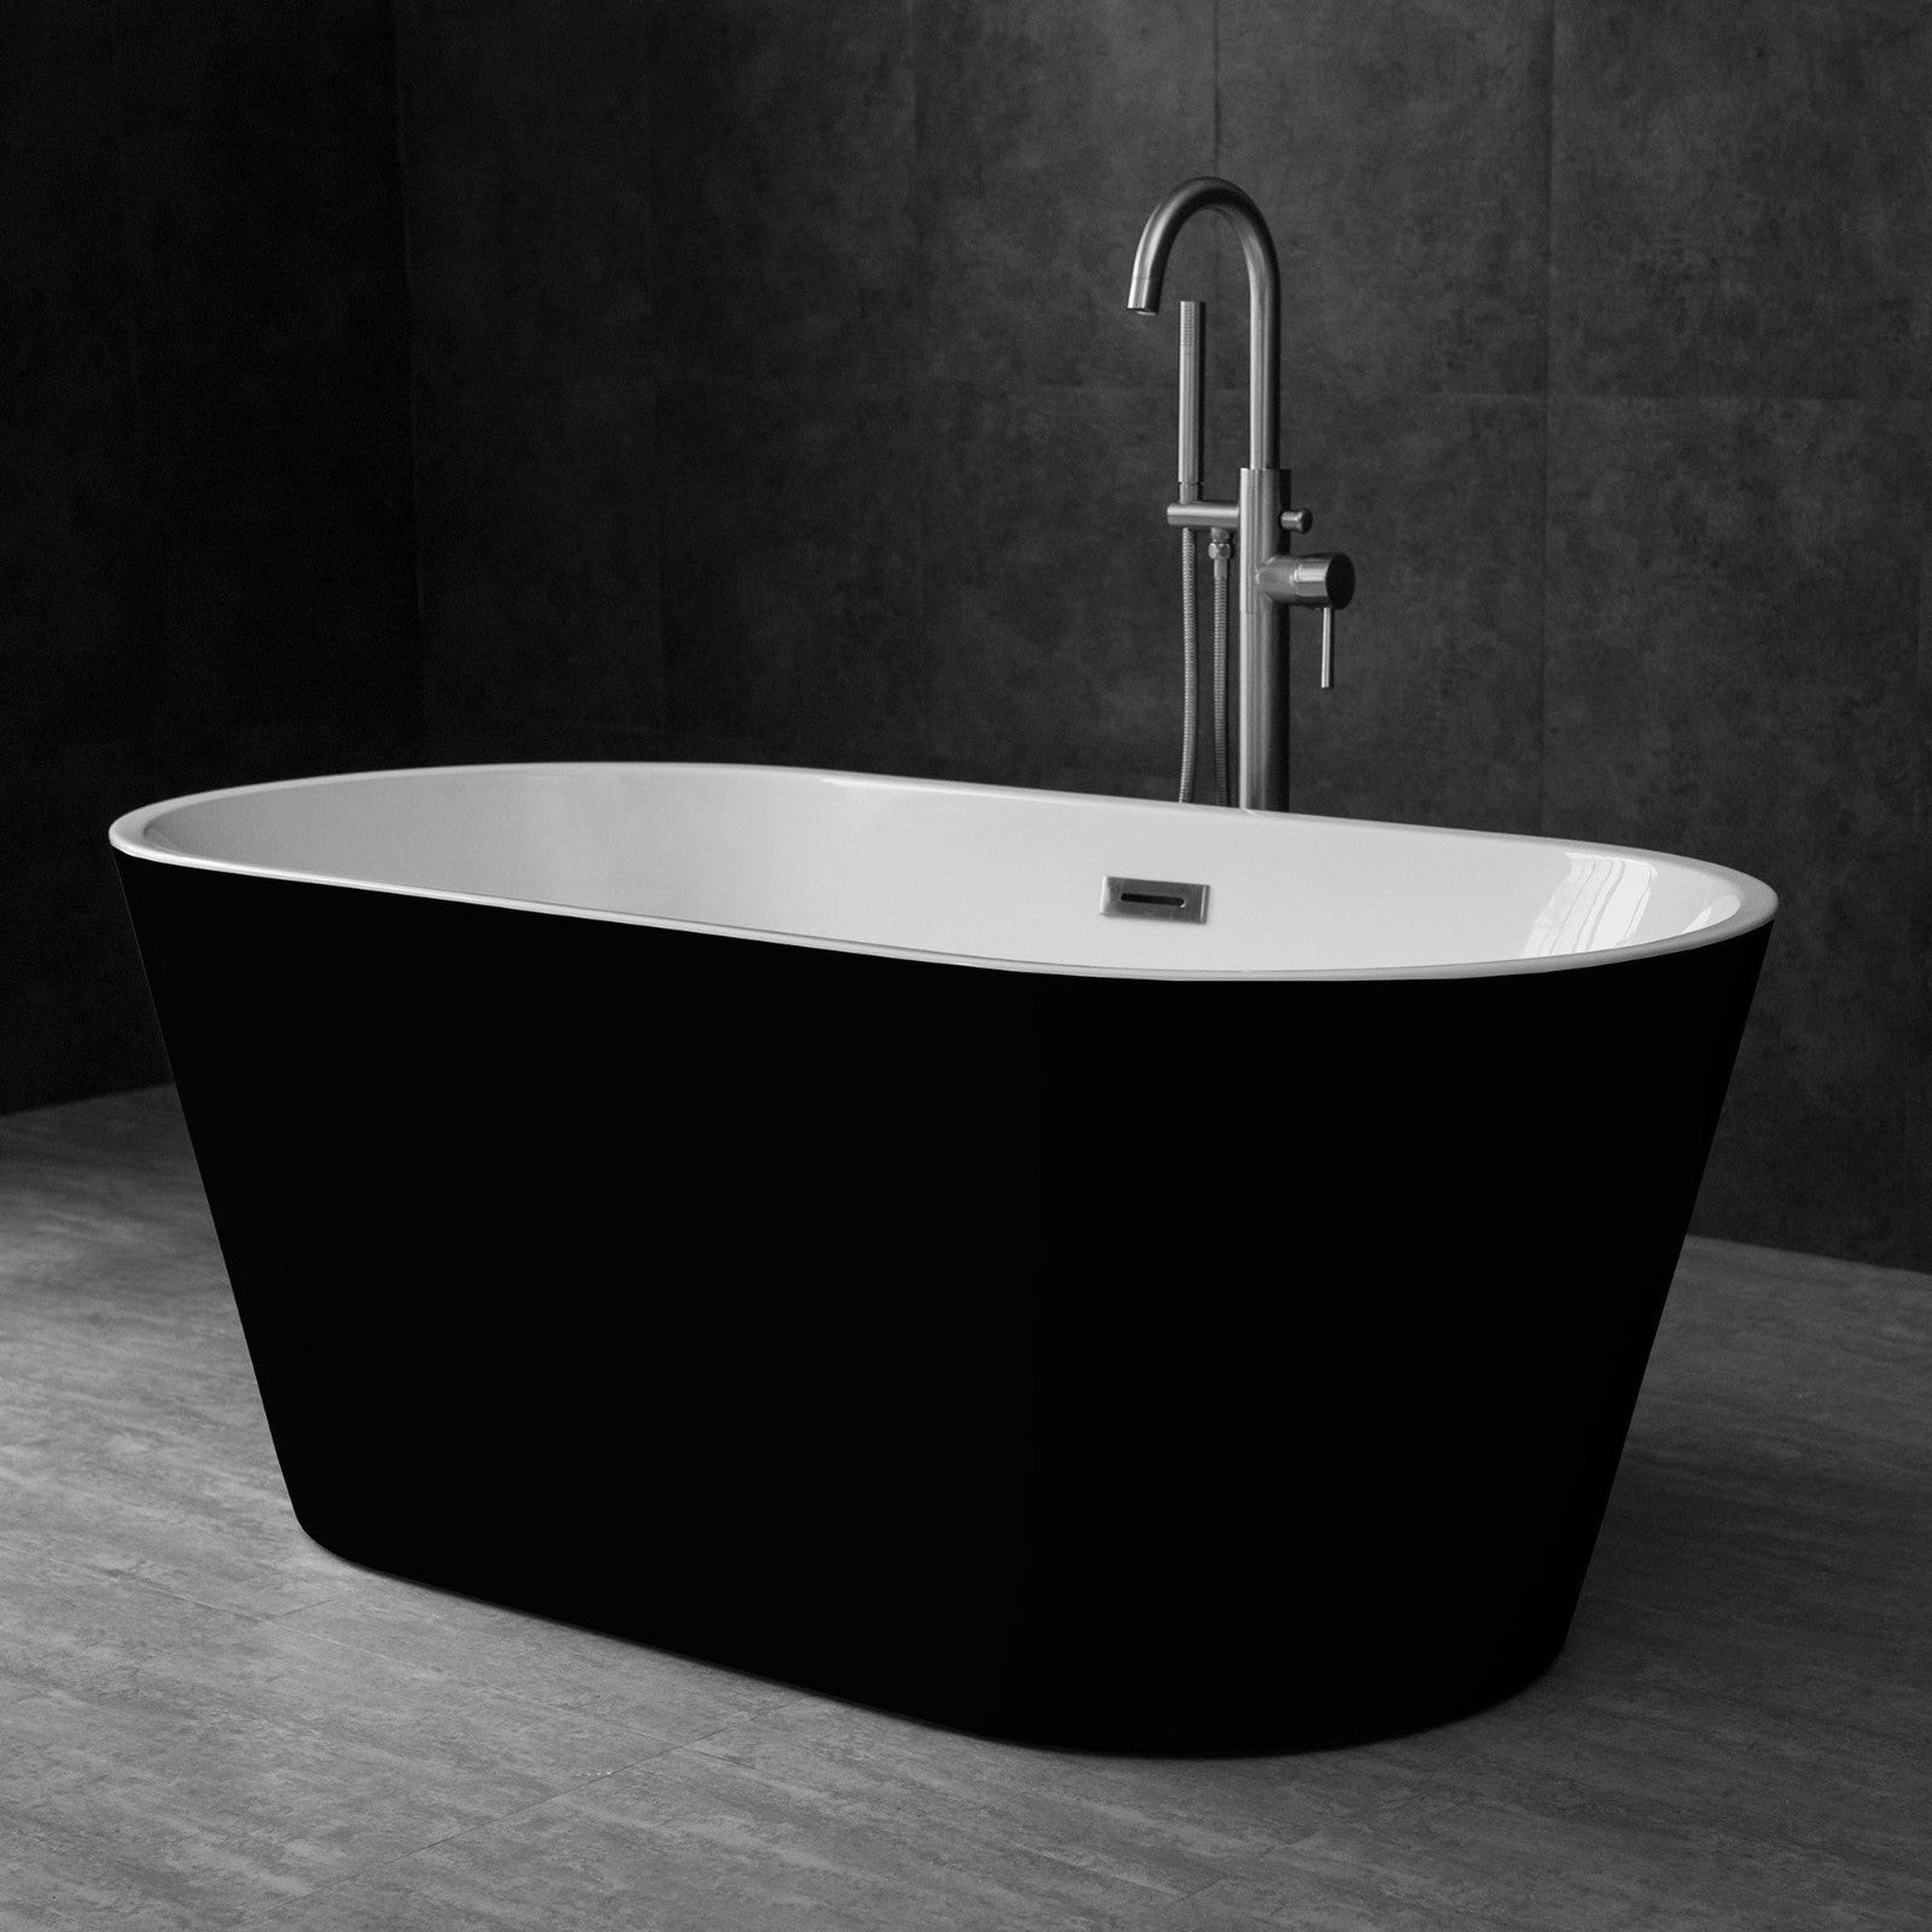 WoodBridge 59" Black Acrylic Freestanding Contemporary Soaking Bathtub With Brushed Nickel Drain, Overflow, F0001BNVT Tub Filler and Caddy Tray